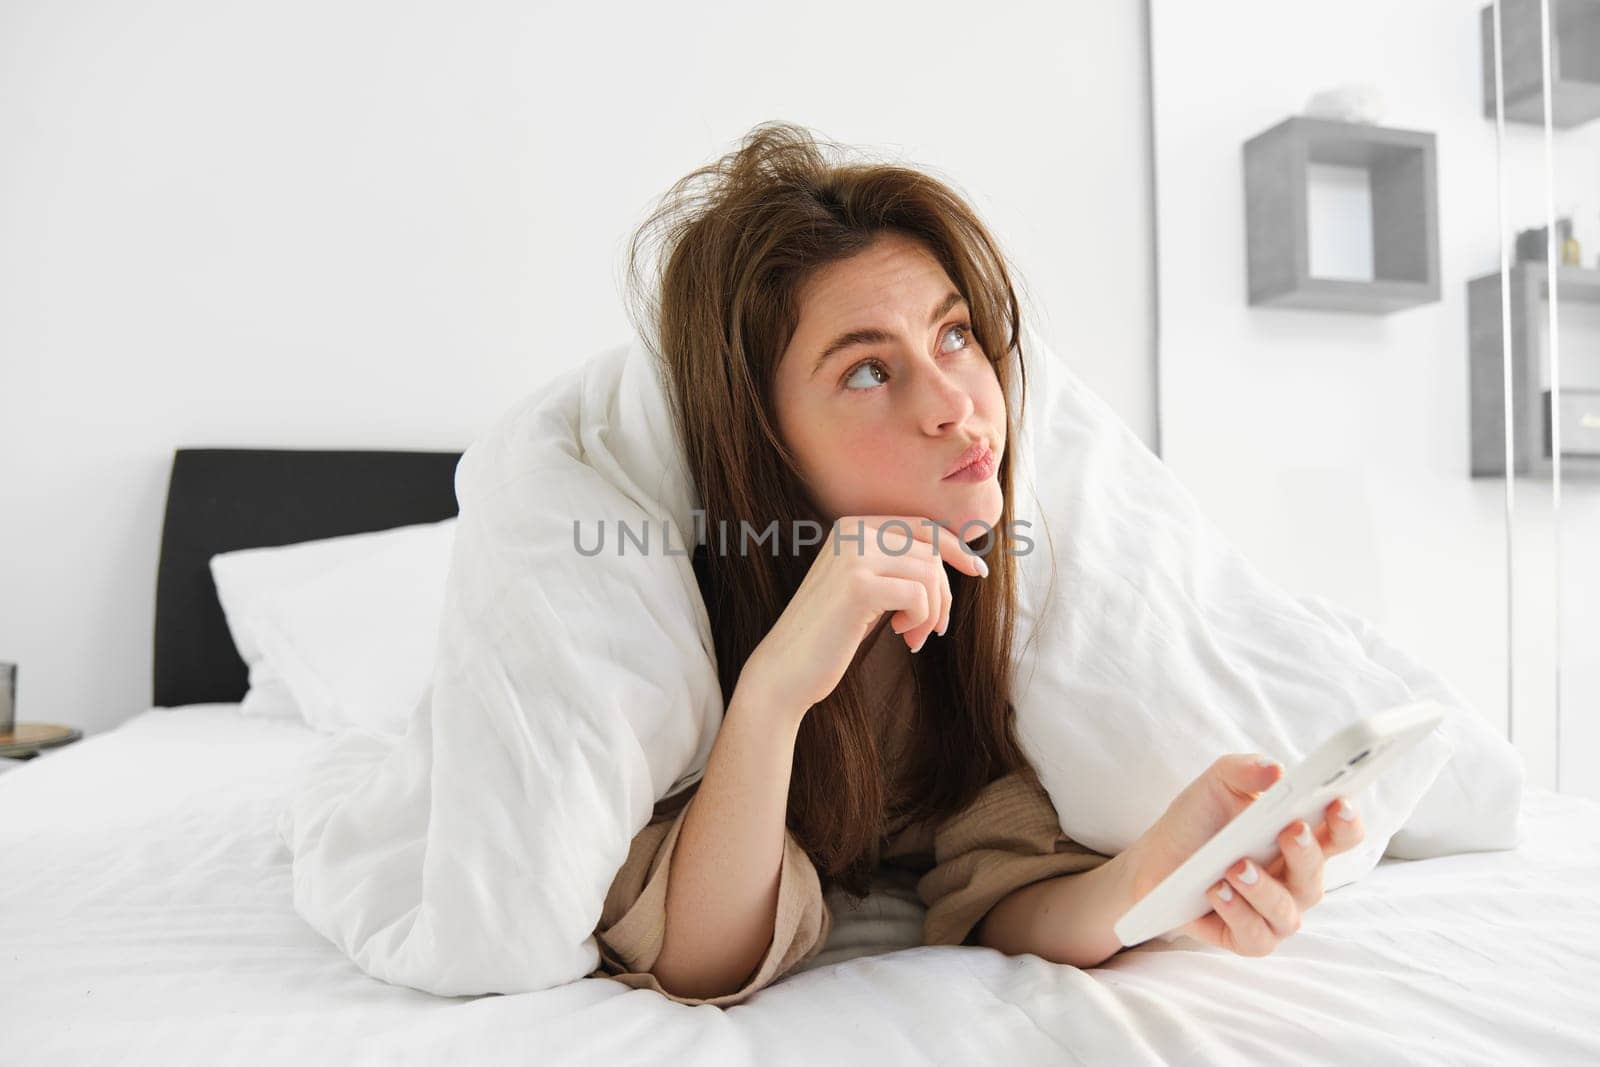 Photo of beautiful joyful woman in pyjama using mobile phone and smiling while lying on bed after sleep or nap.